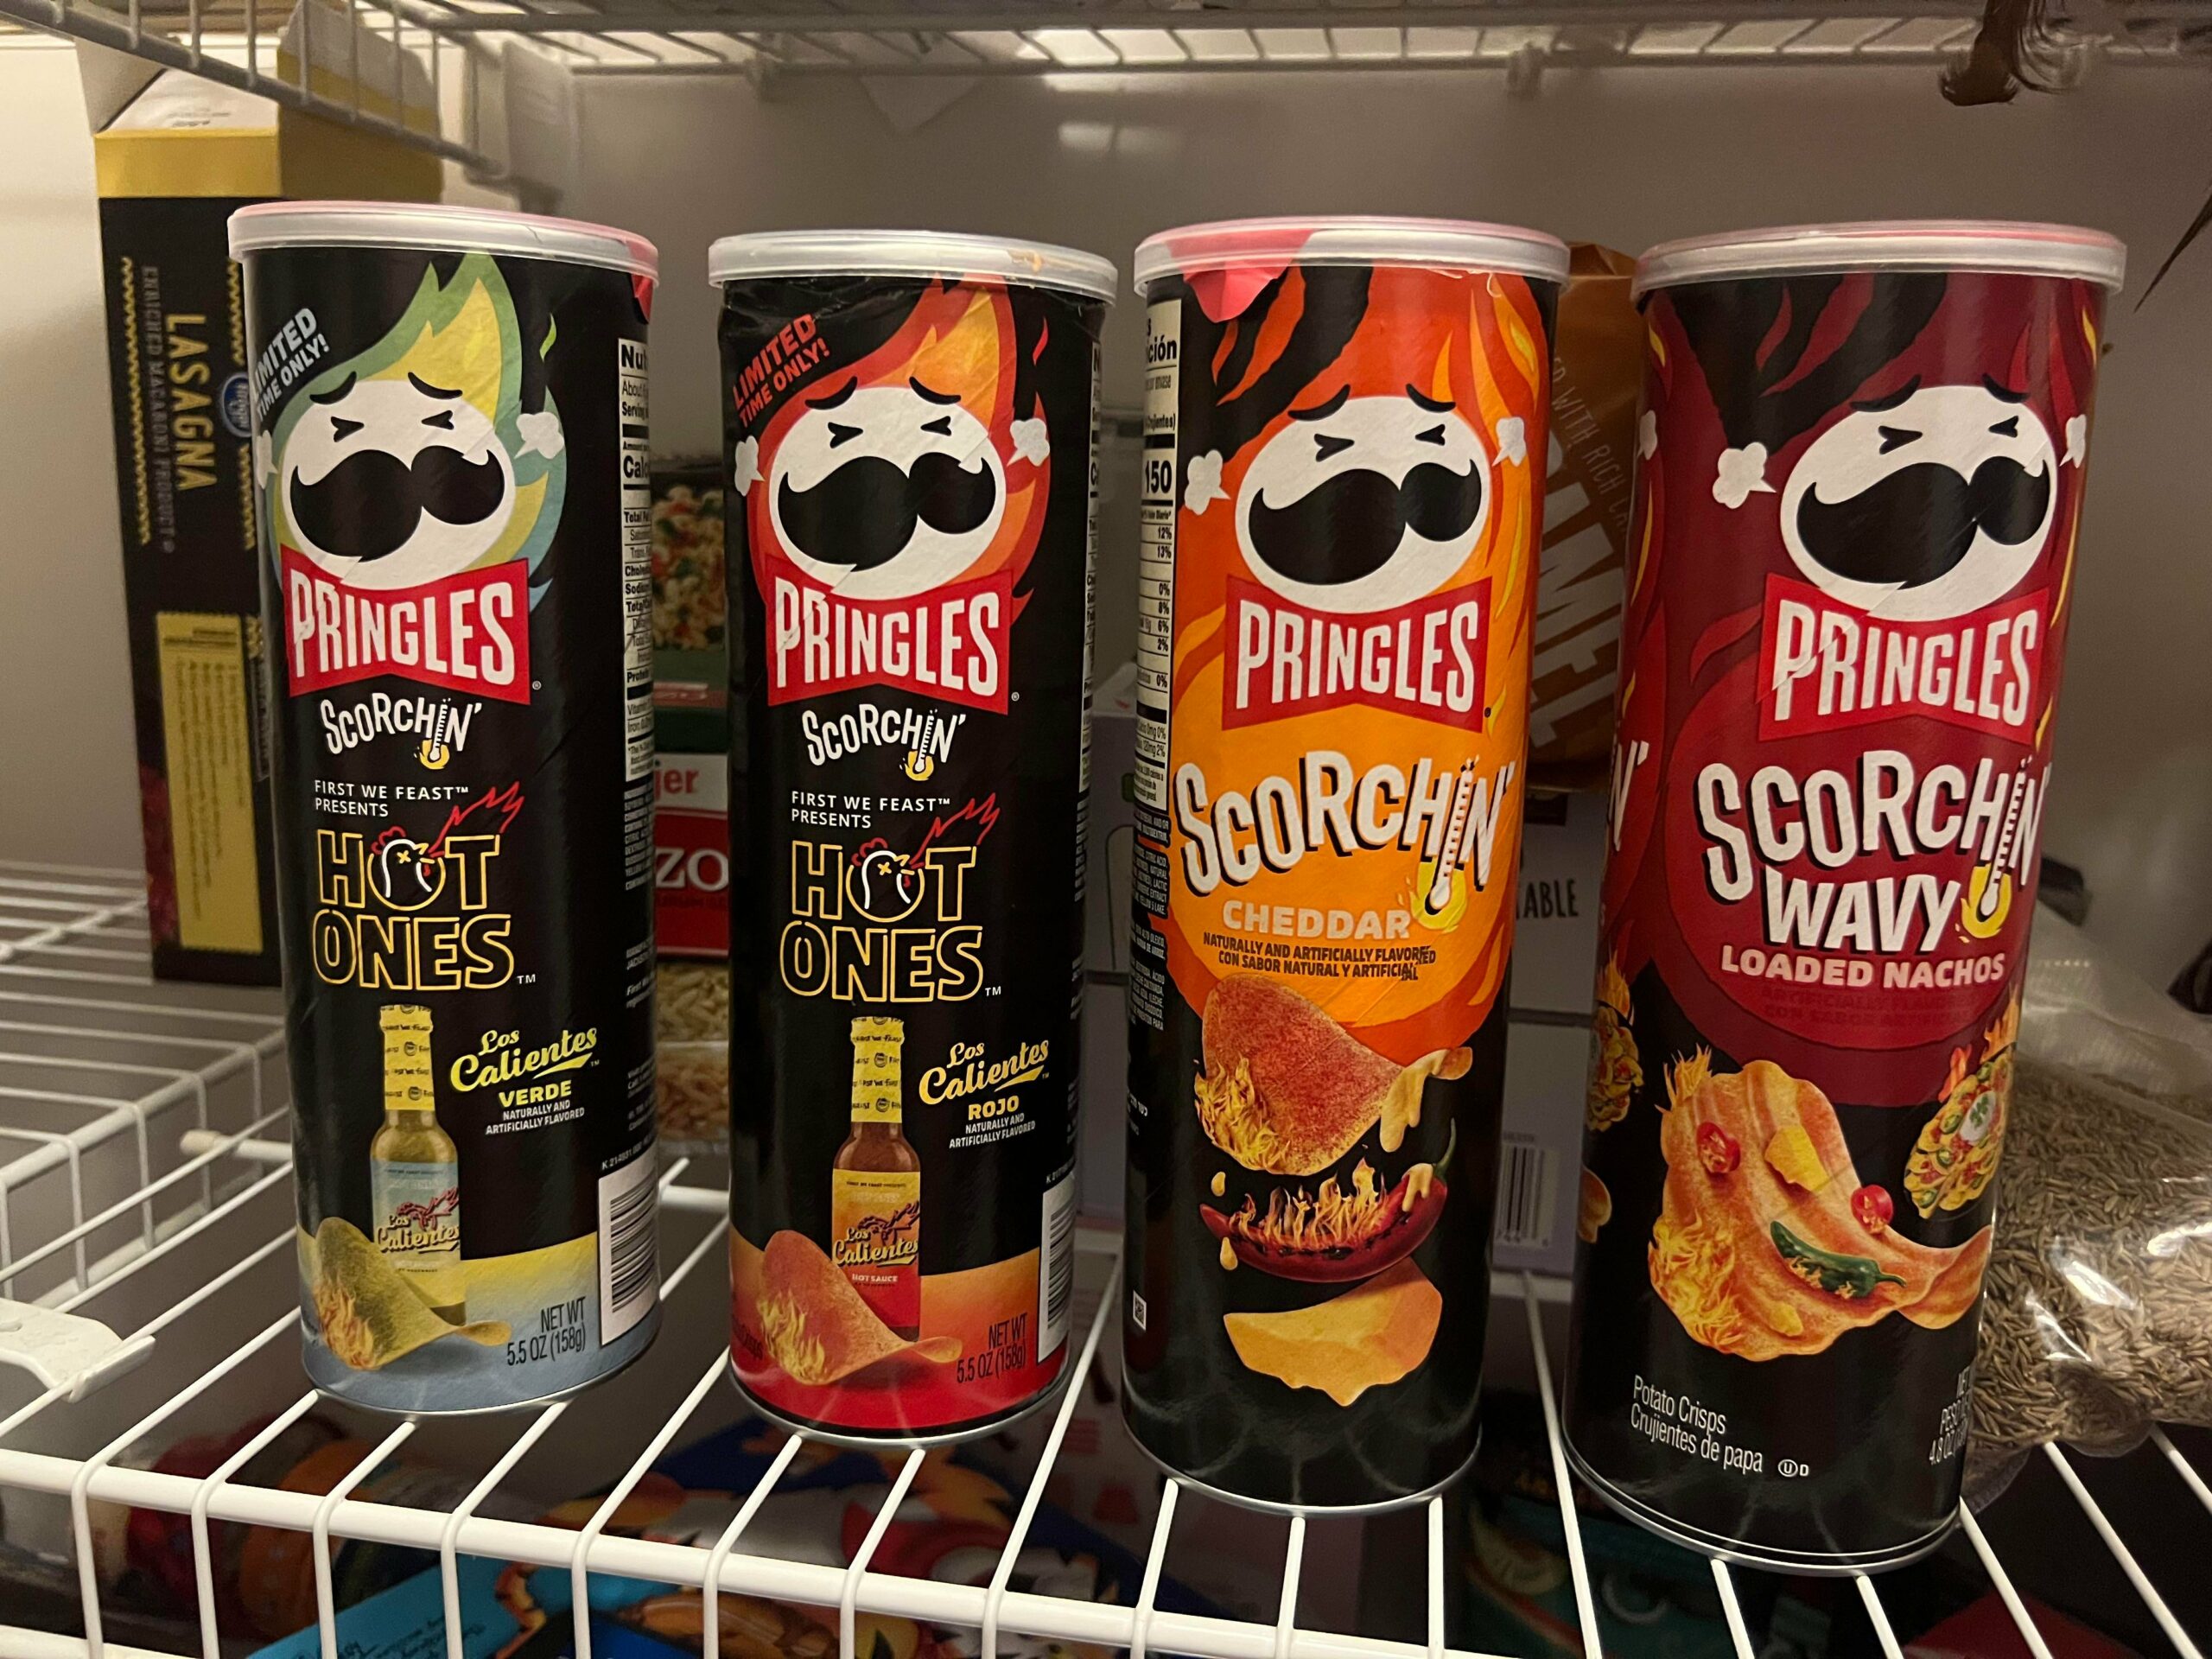 Still trying to find the elusive third Hot Ones Pringles. - Chili Chili